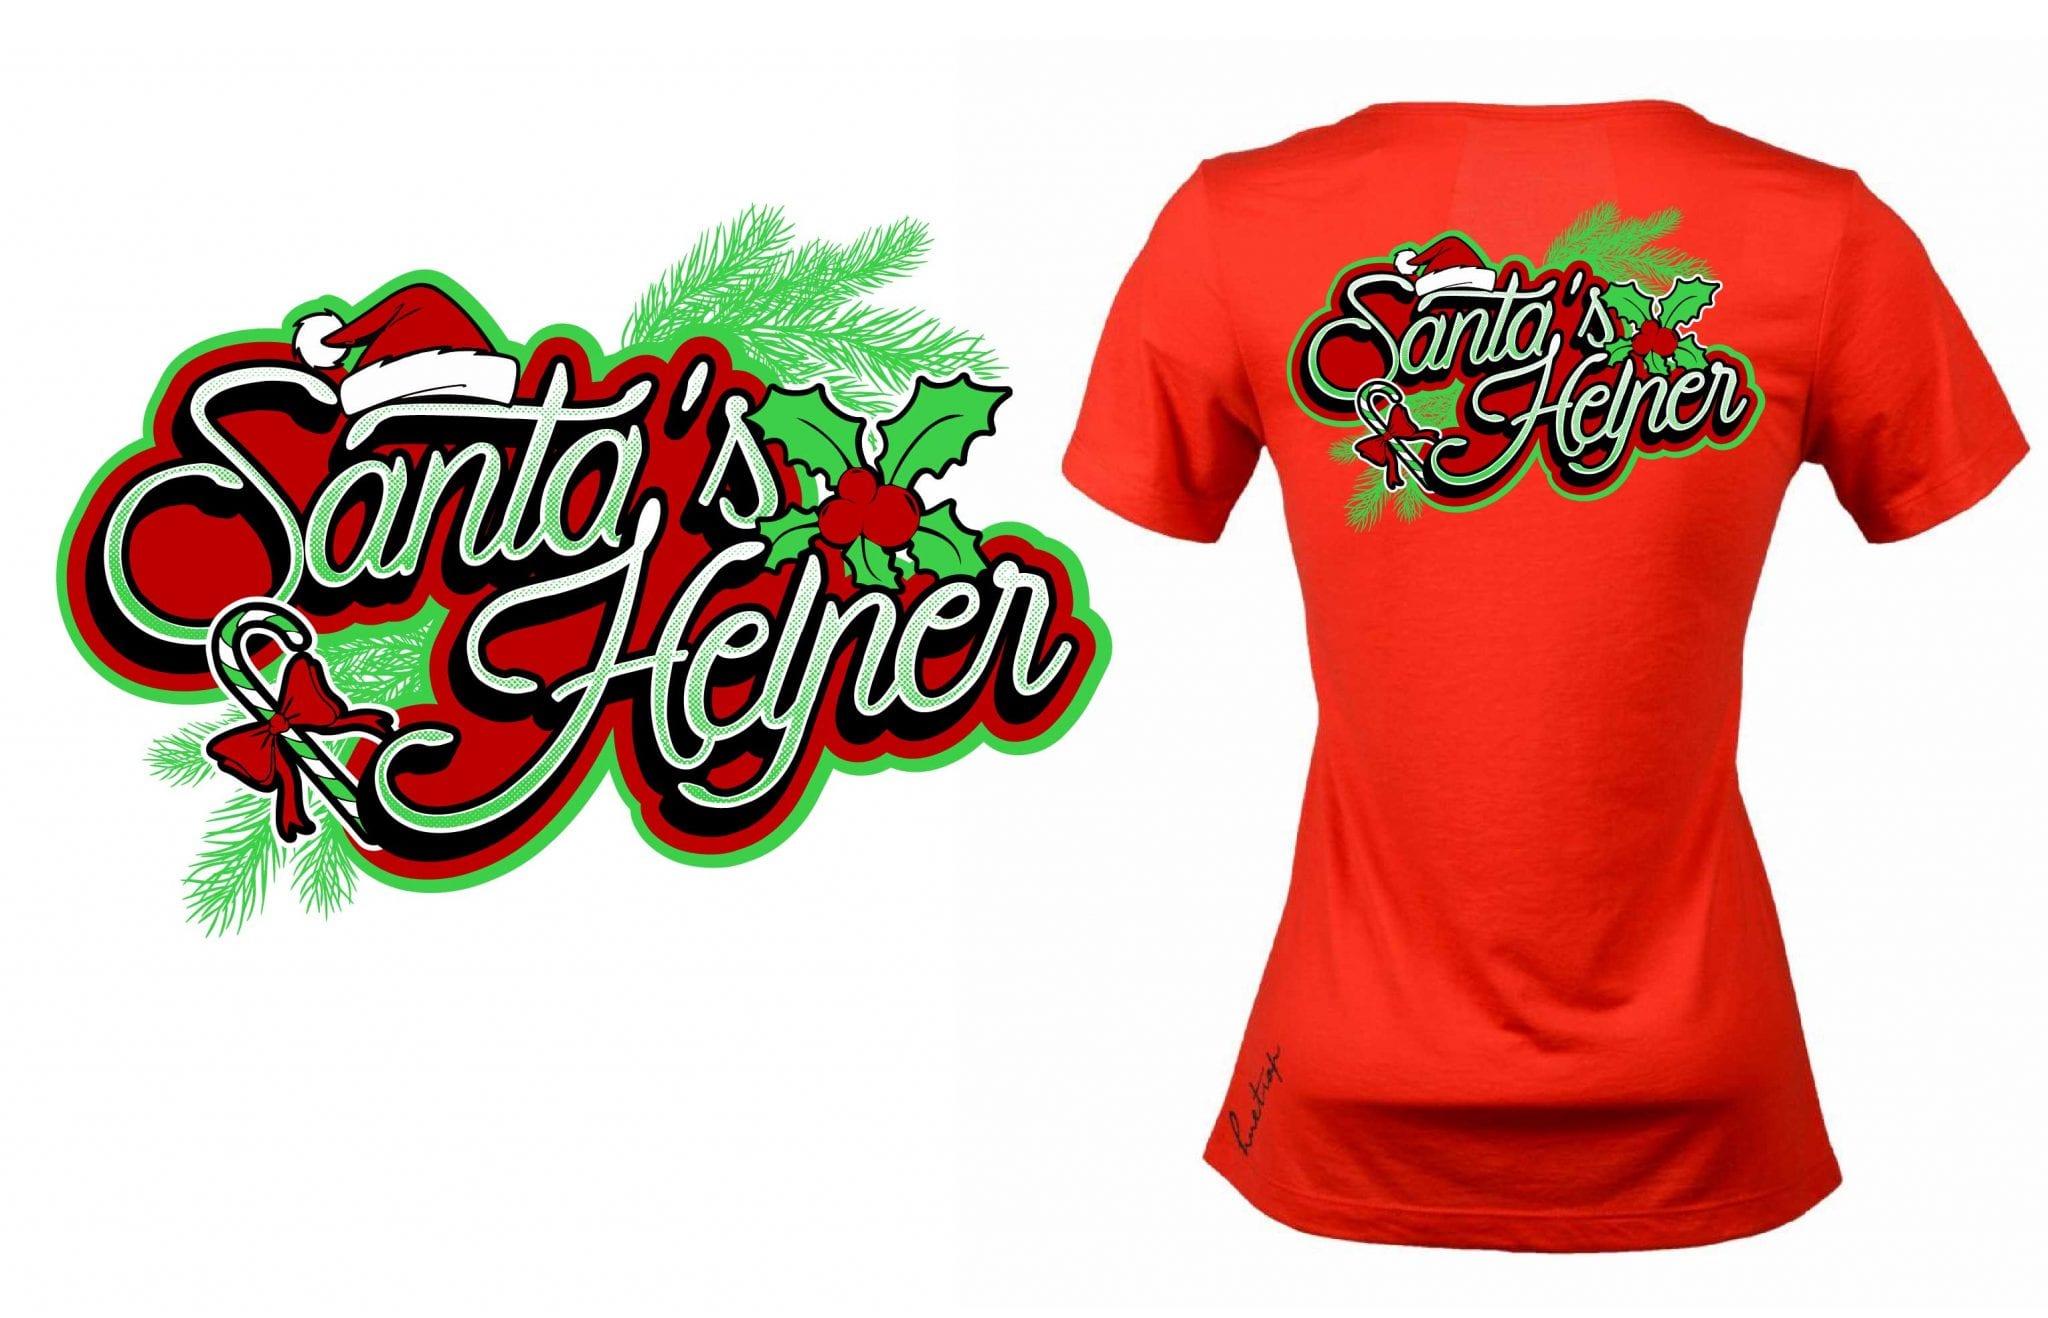 Eyecatching vector logo design for t-shirt for 2015 Holly Feis event ...